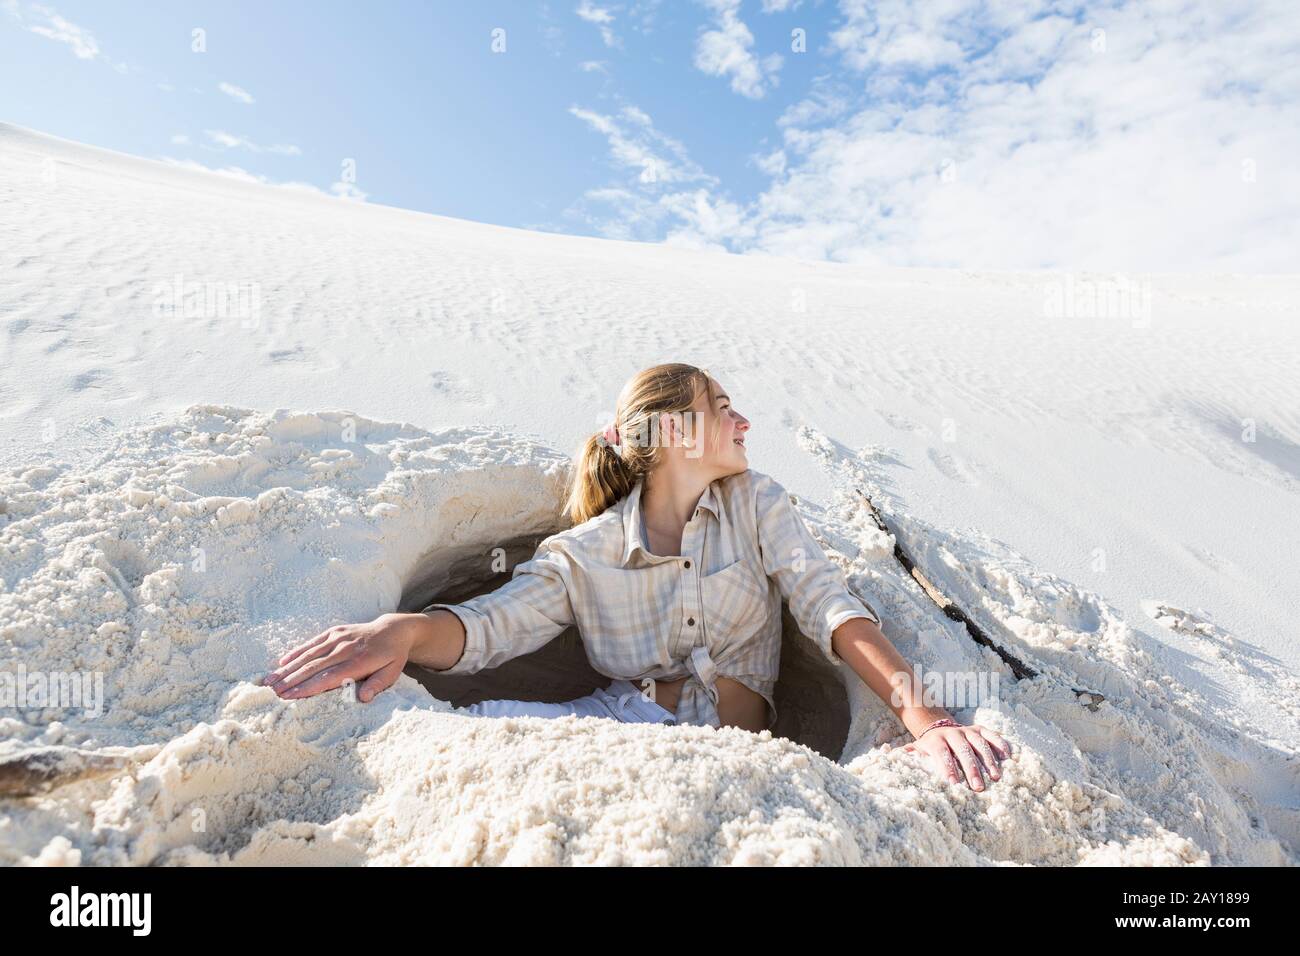 13 year old girl emerging from a dug out hole in white sand dunes Stock  Photo - Alamy